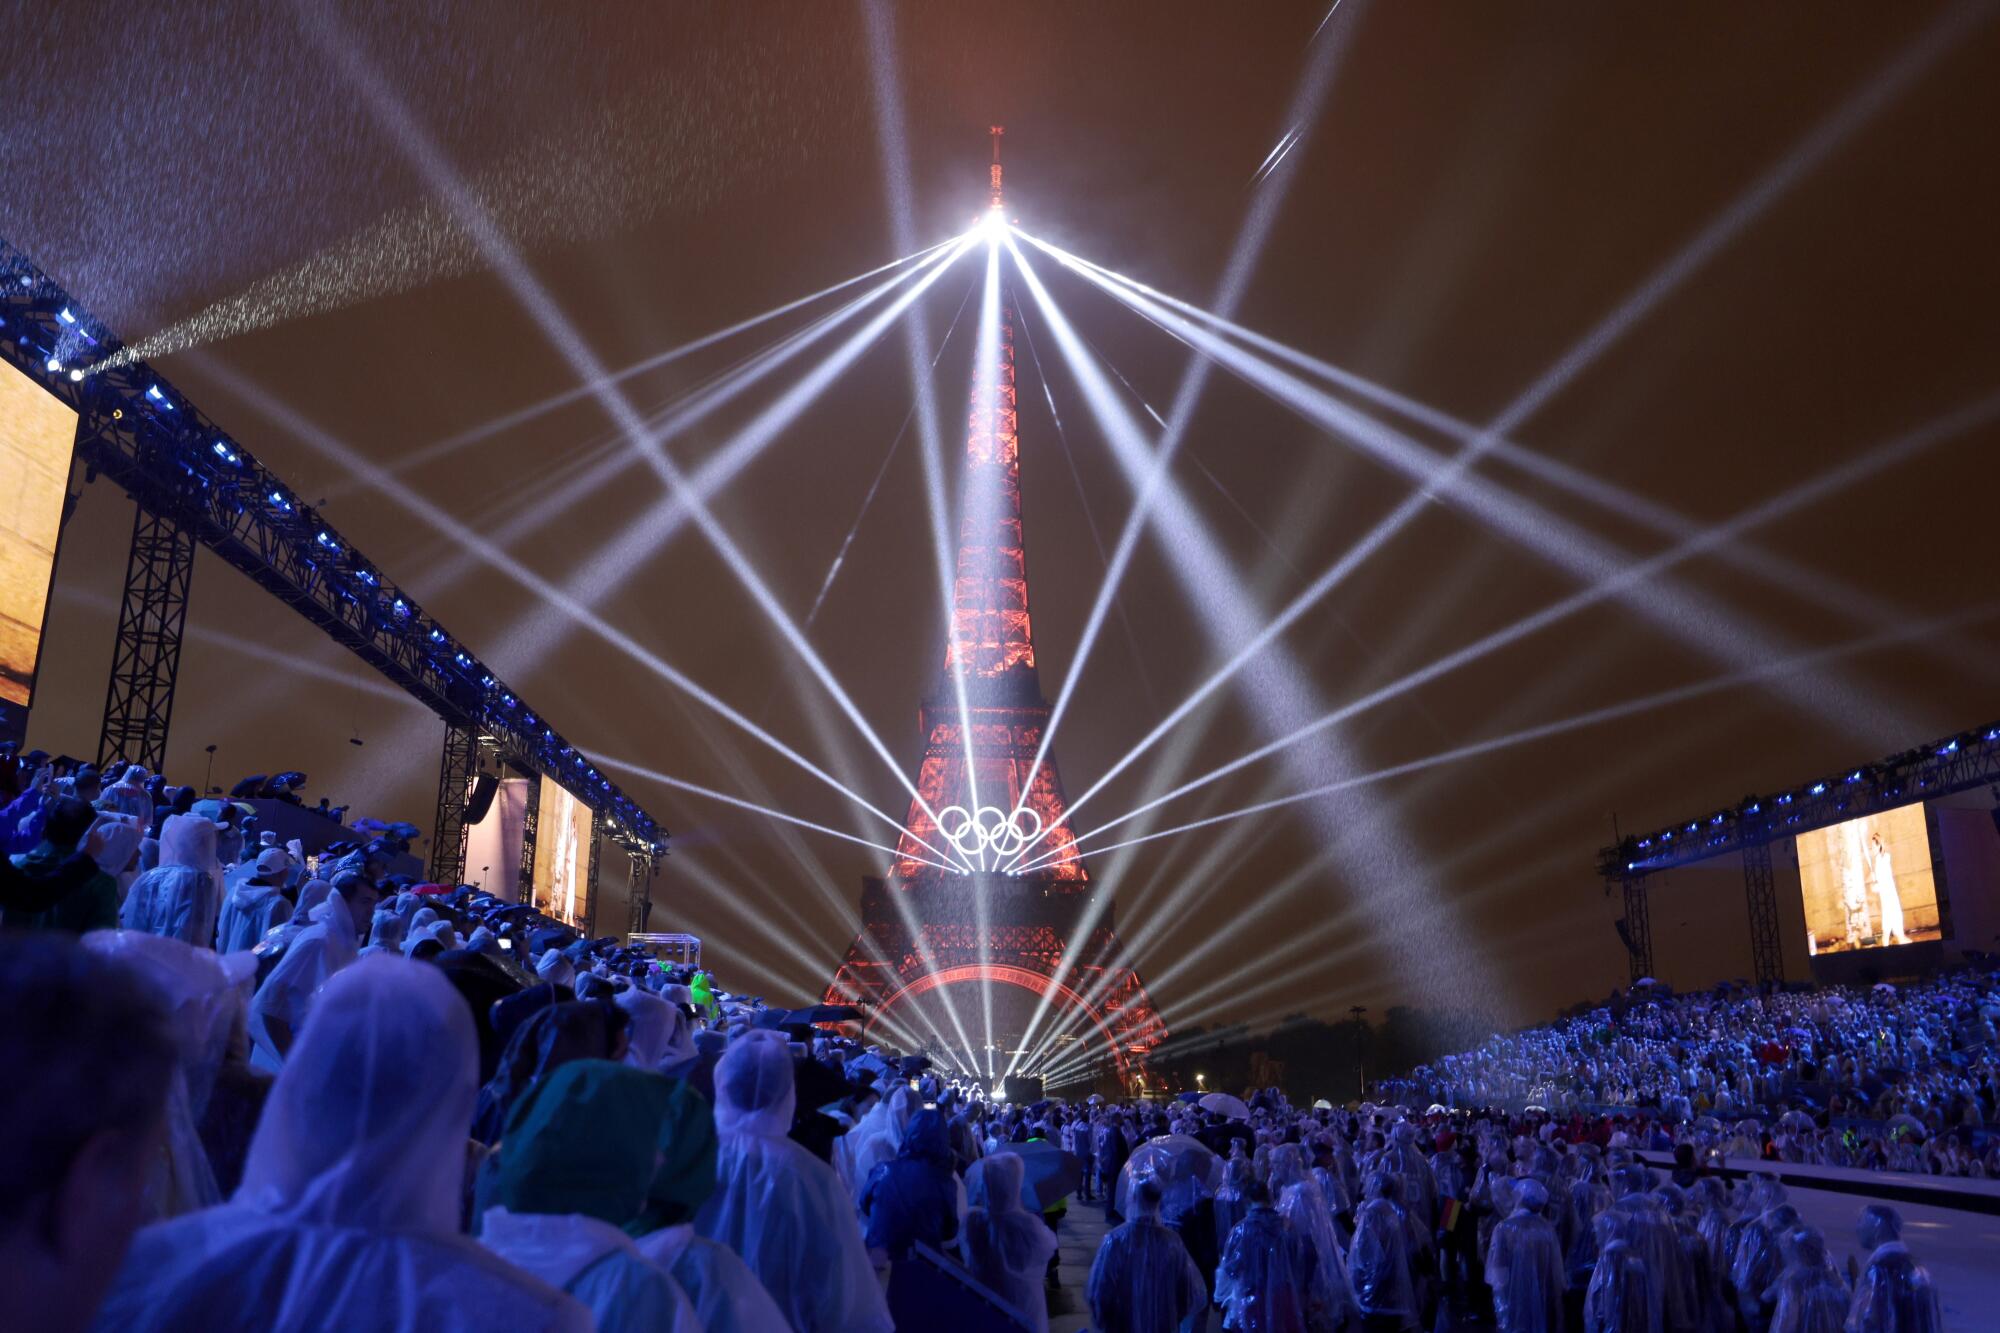 A light show is projected from the Eiffel Tower.